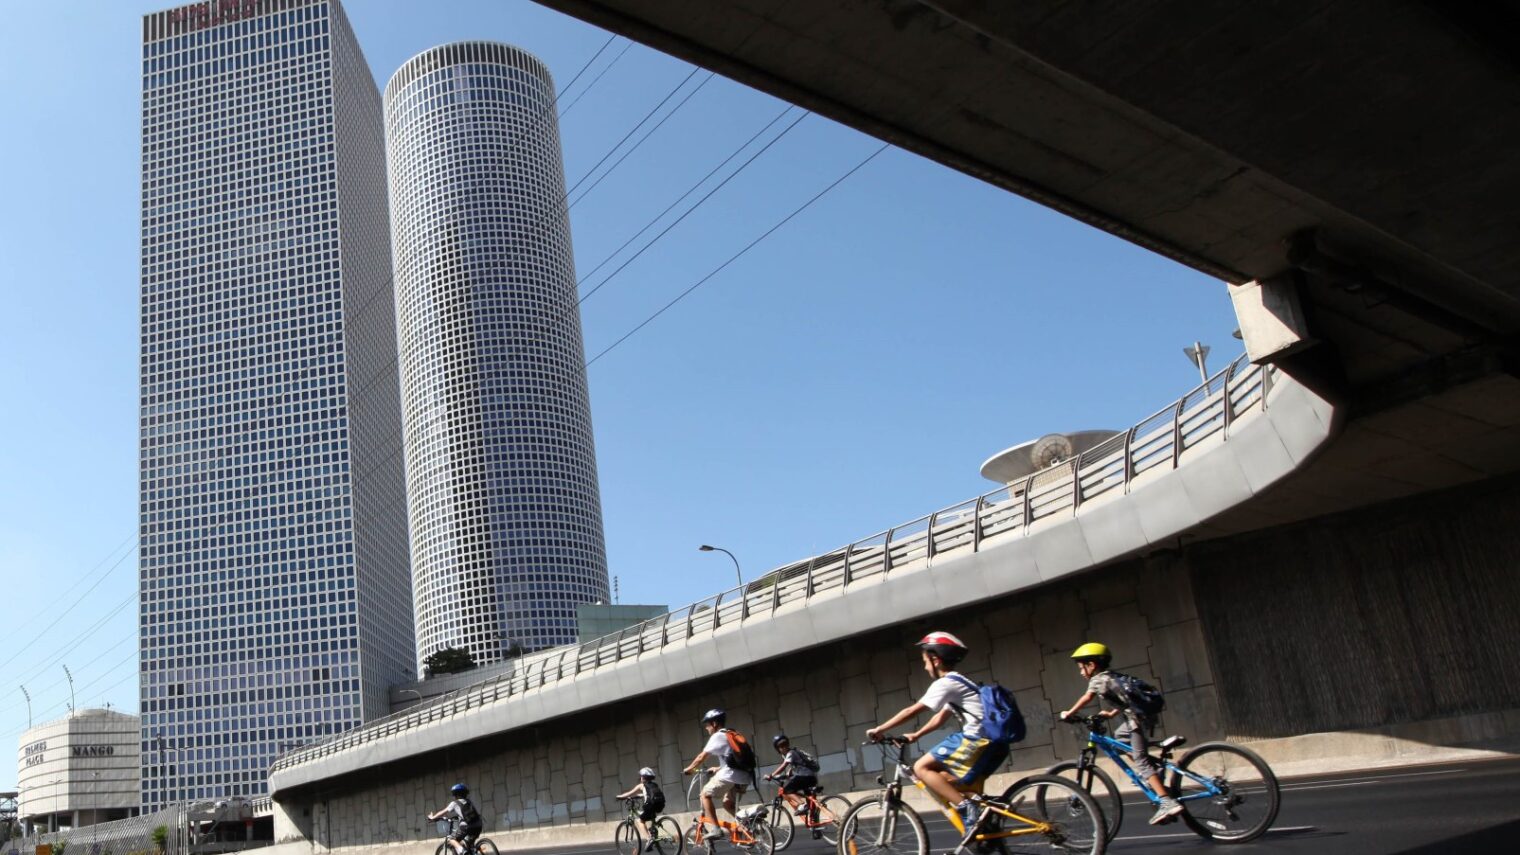 Israelis ride their bicycles along the empty Ayalon Highway in Tel Aviv on Yom Kippur. Photo by Chen Leopold/Flash 90